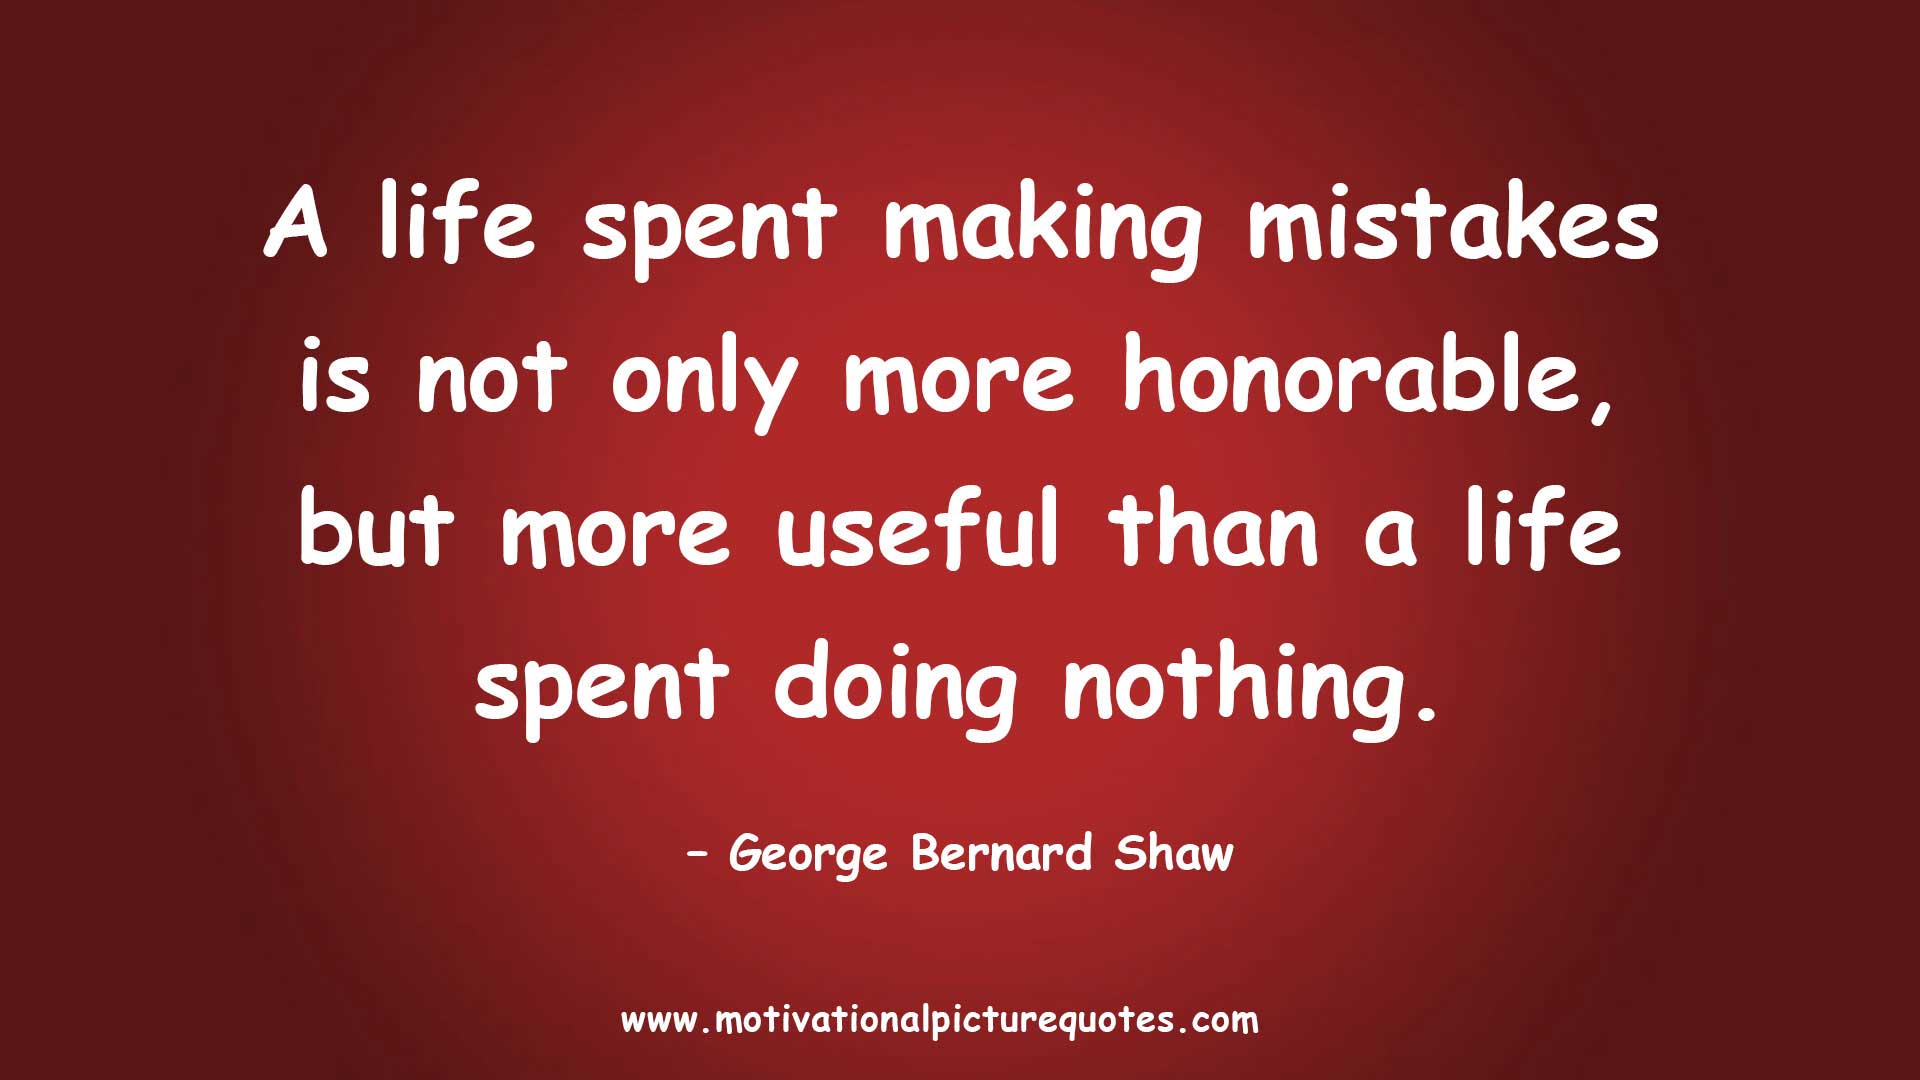 Sayings about mistakes. A Life spent making mistakes is not only more Honorable, but more useful than a Life spent doing nothing.. Mistakes Motivation. Motivation sayings about mistakes. Spent my life